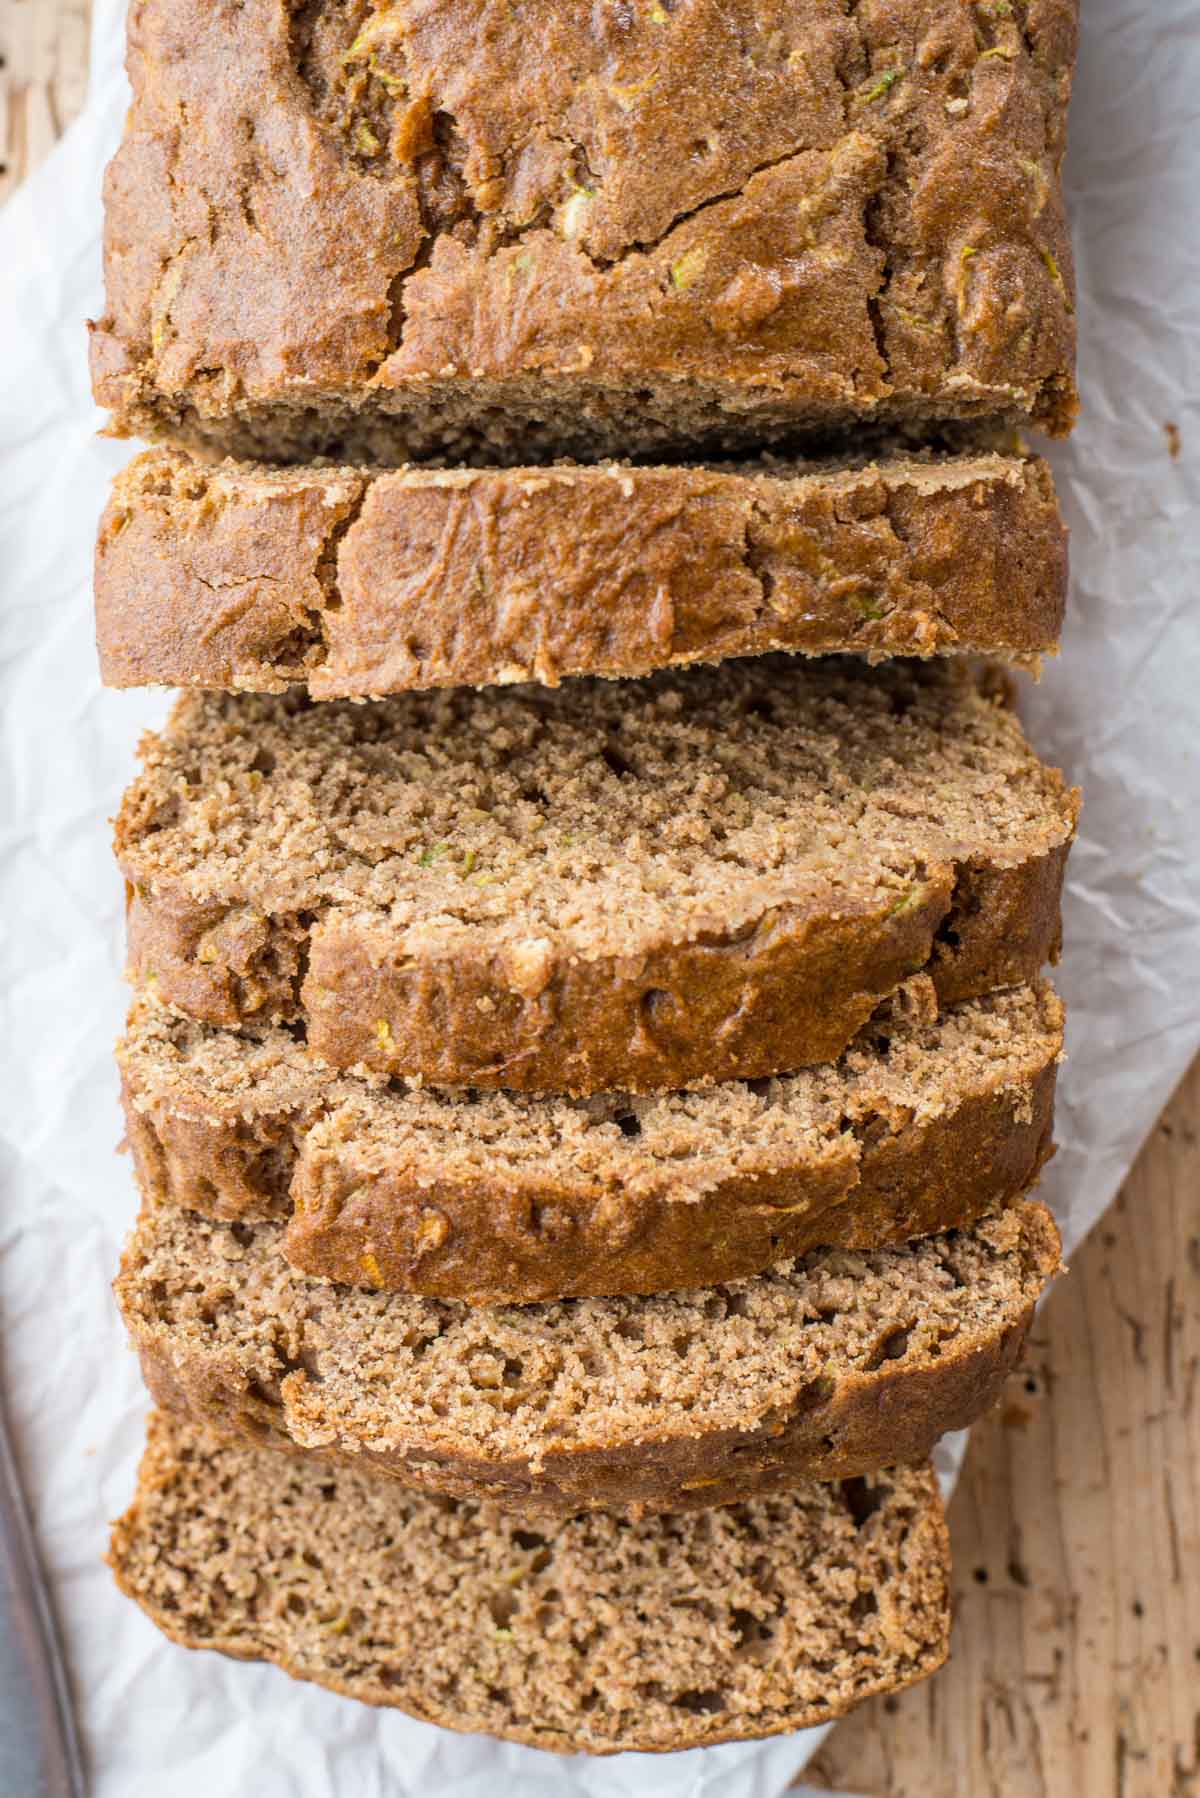 Try this high fiber, high protein spiced gluten-free zucchini bread with this easy recipe. 